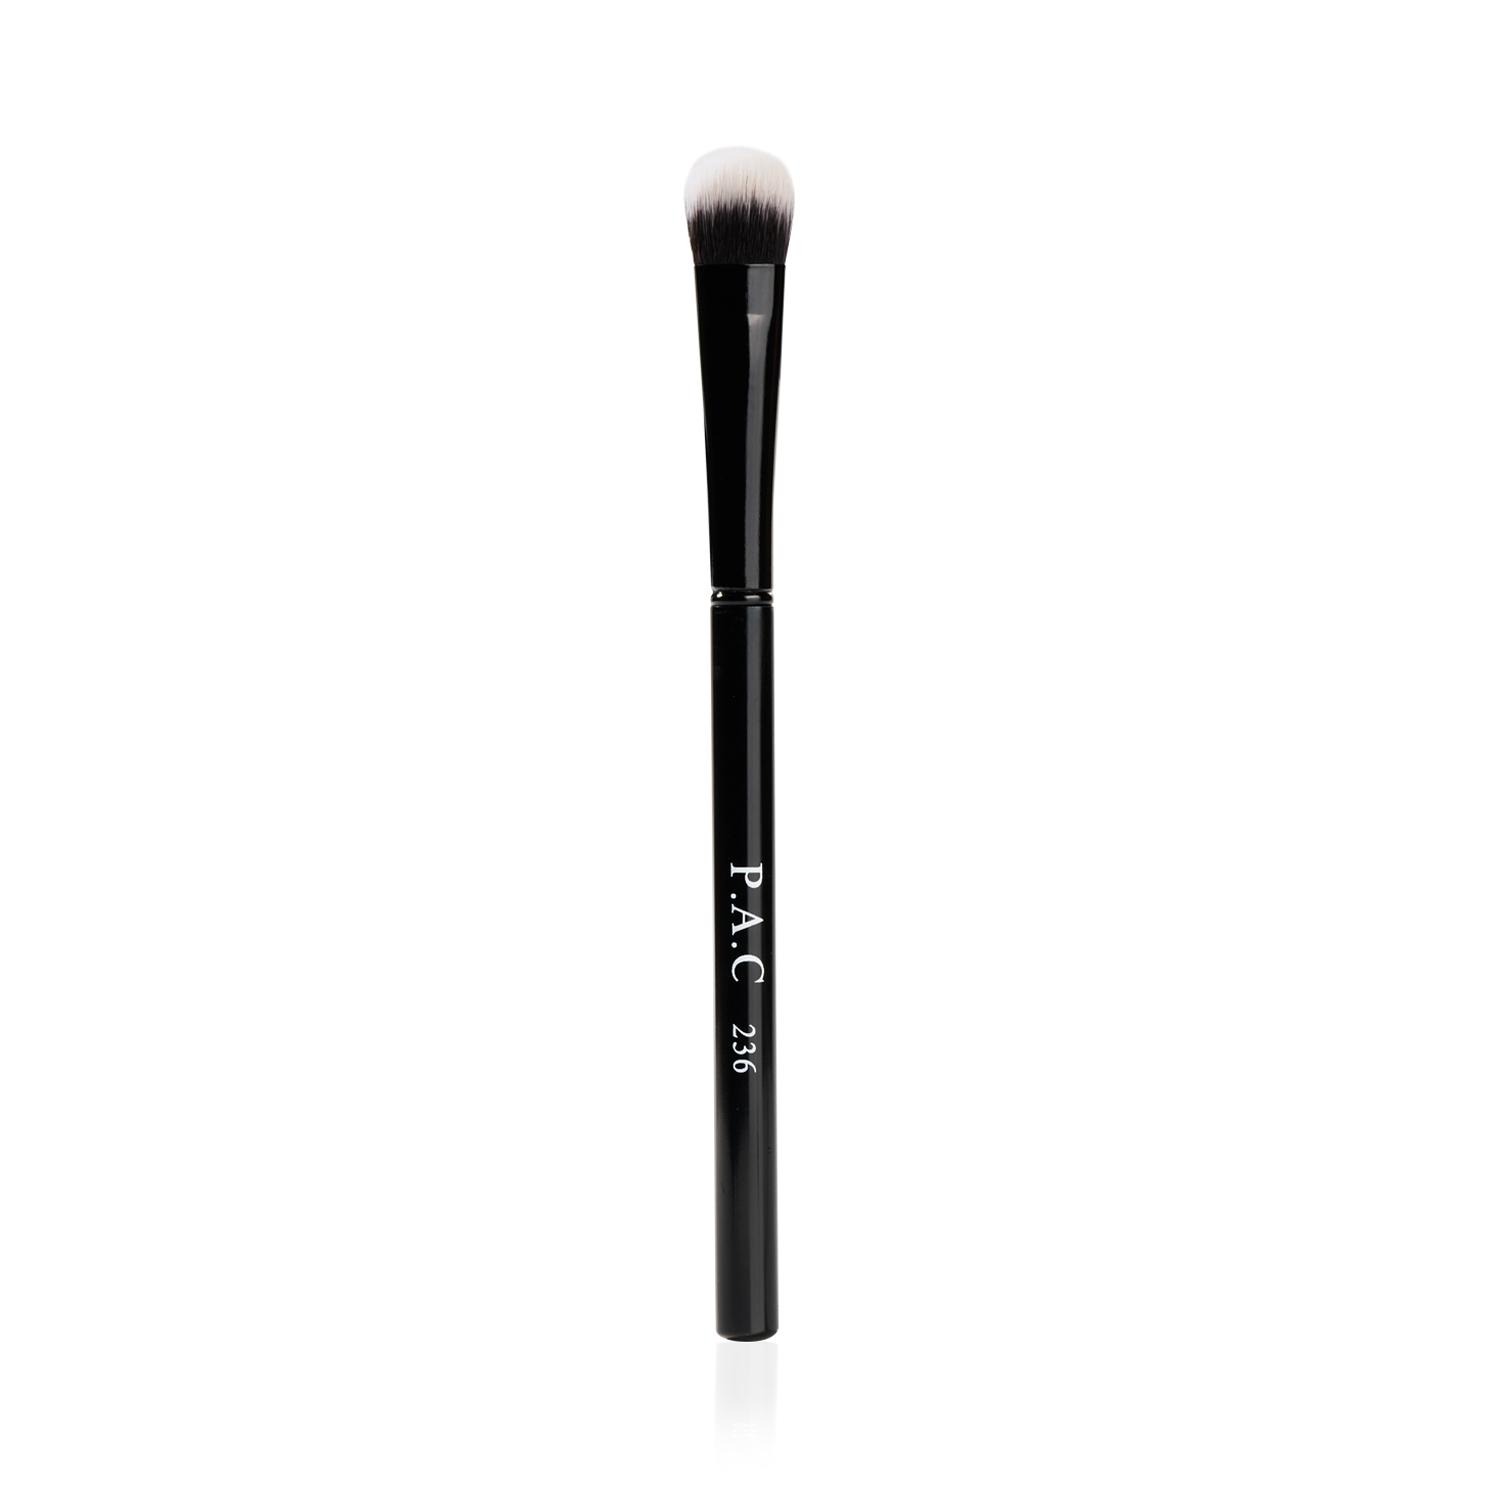 PAC | PAC Concealer Brush - 236 (1Pc)